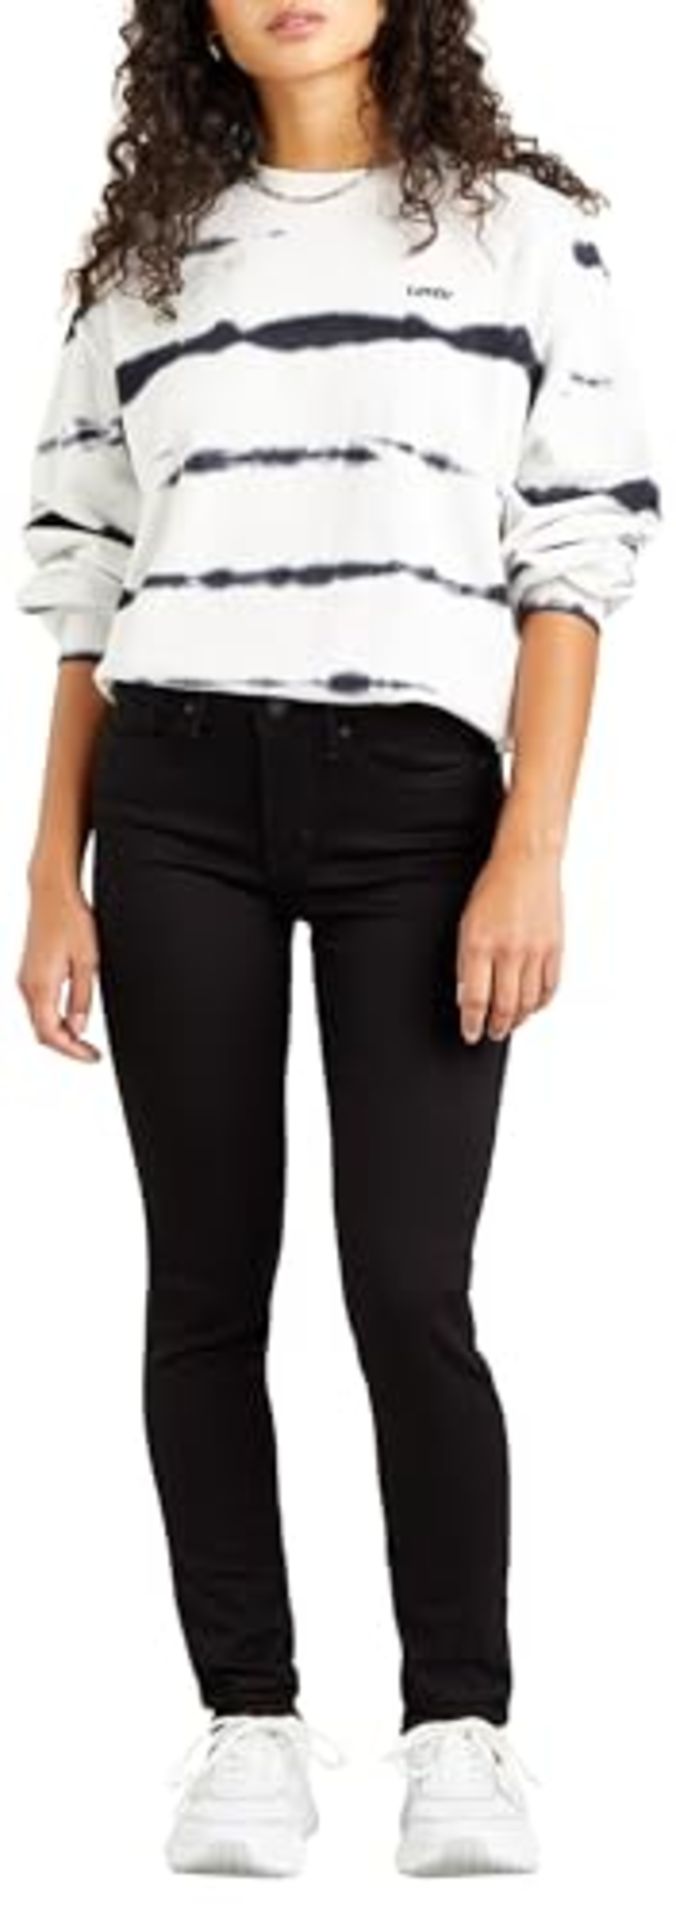 RRP £71.00 Levi's 311 Shaping Skinny Jeans for Women, Black and Black, 26W/30L - Bild 4 aus 6